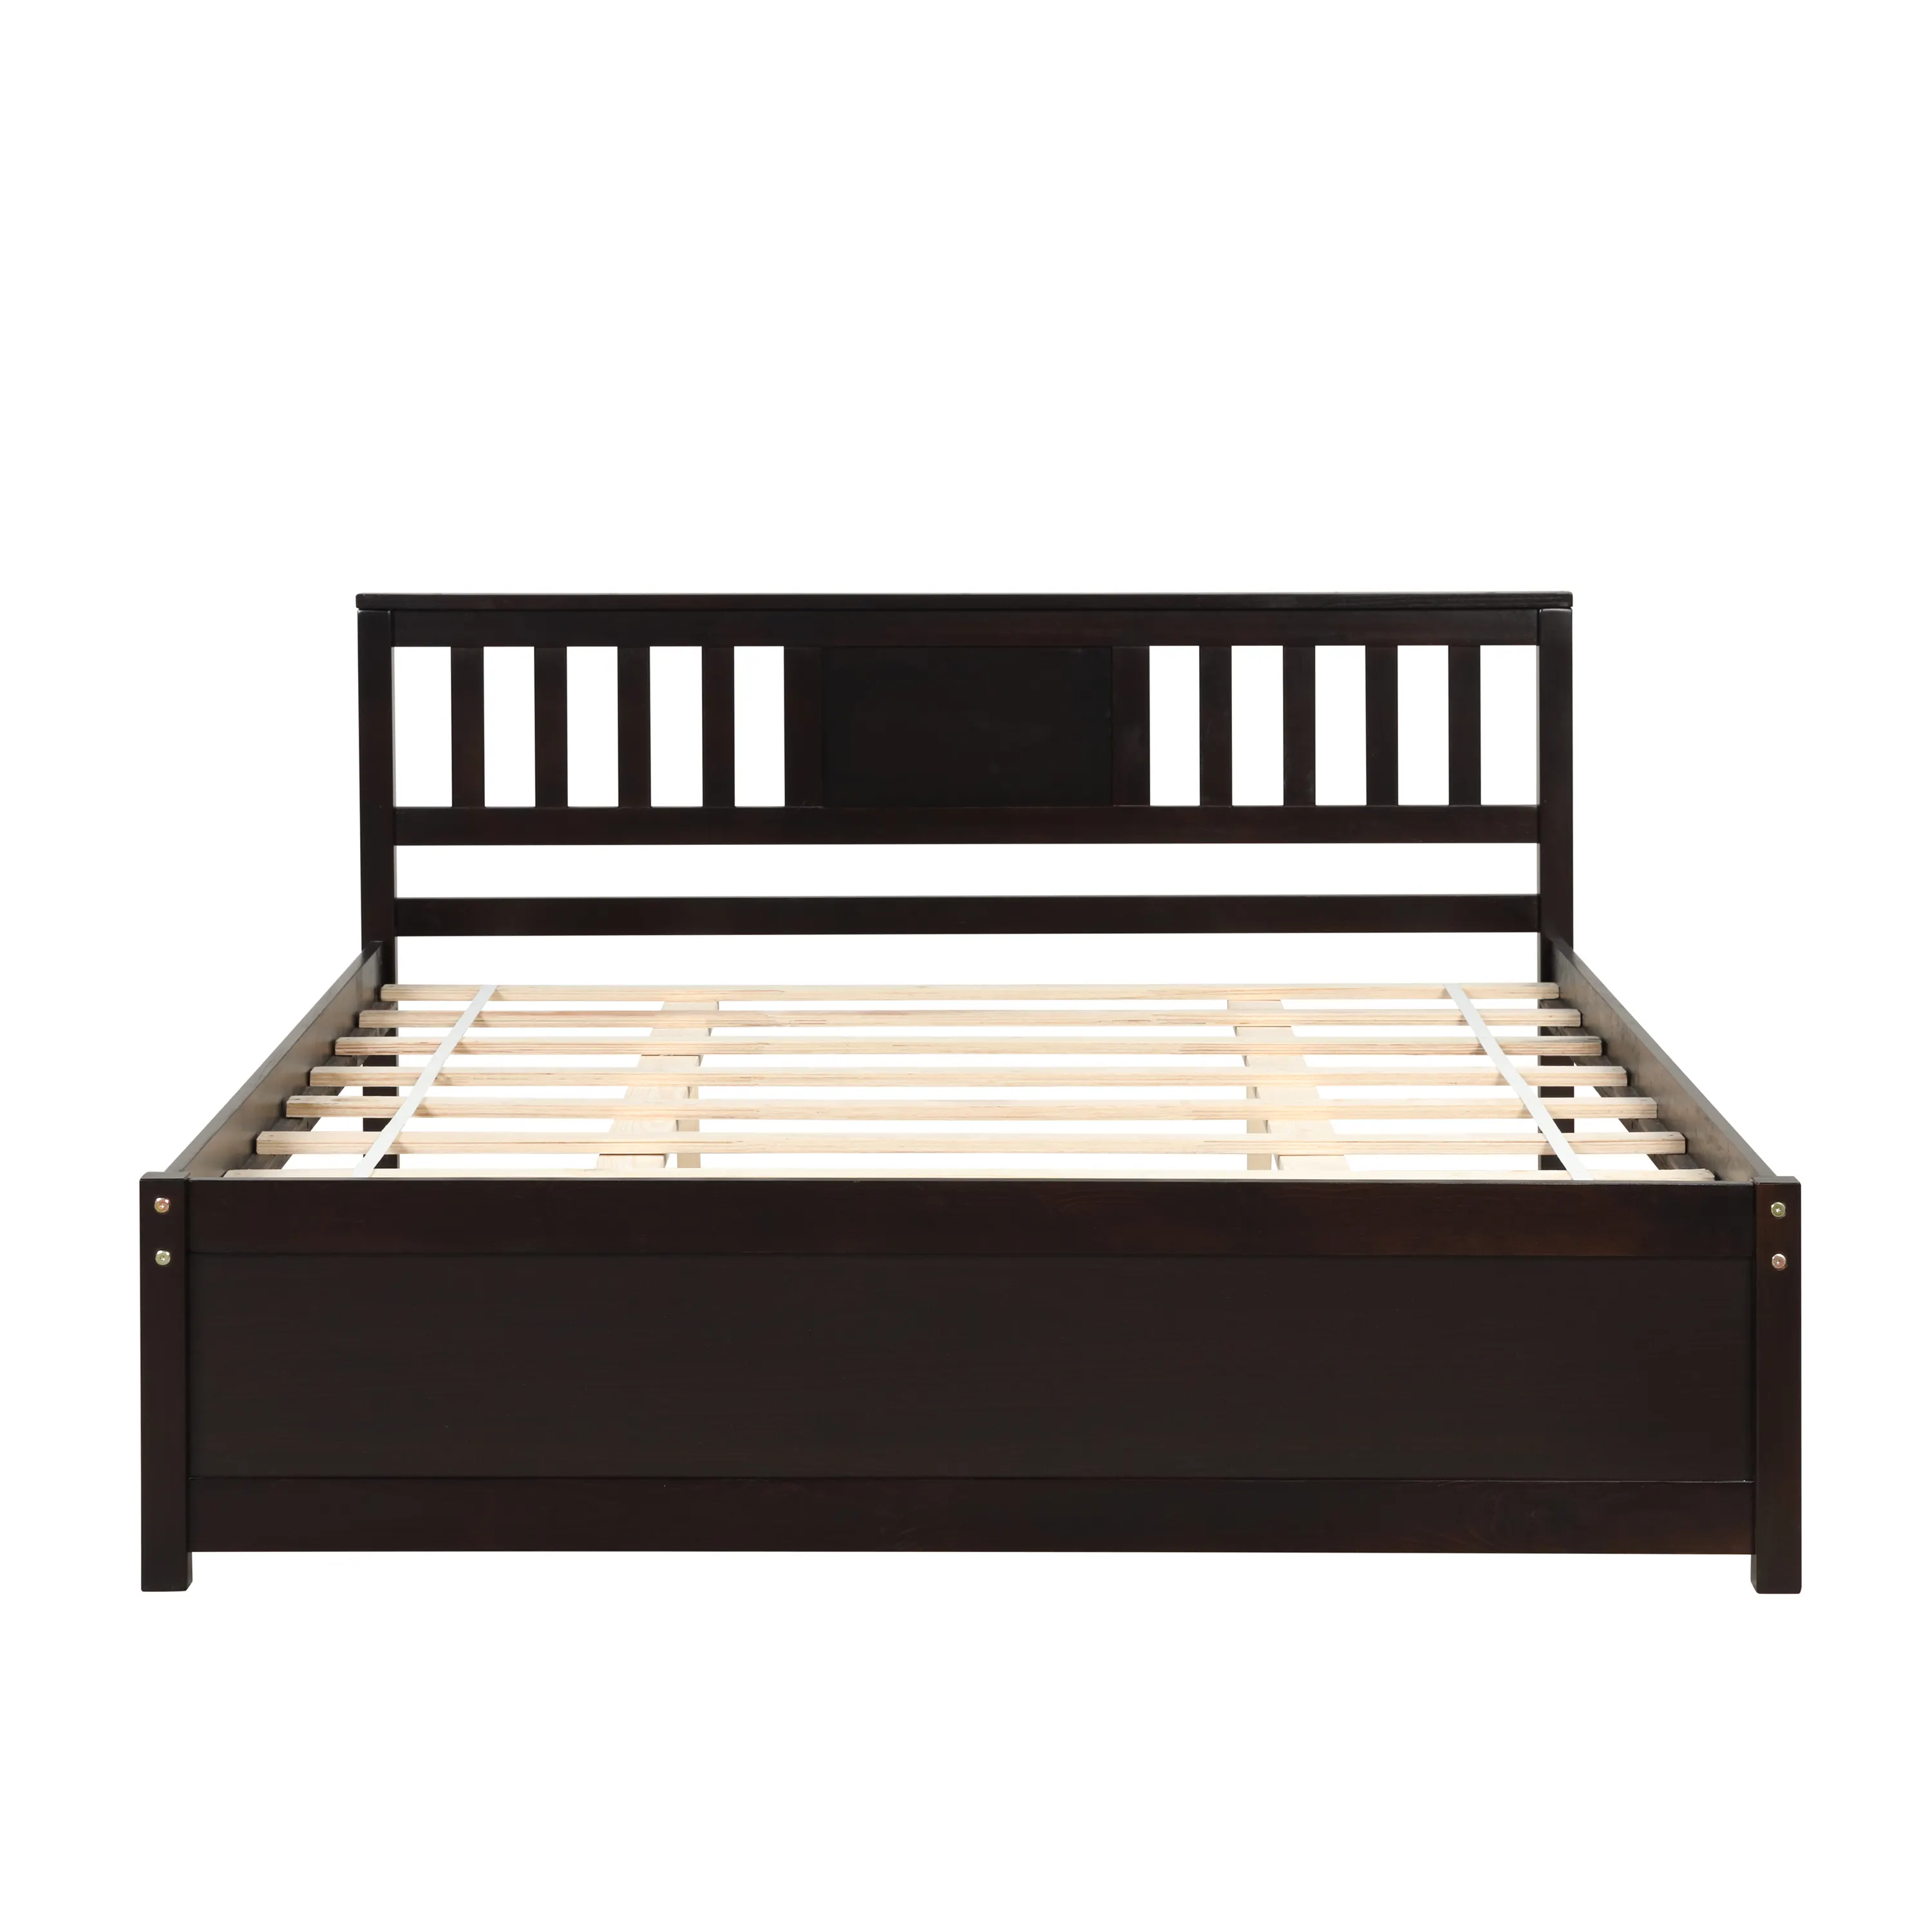 Modern design Wood Platform Queen Bed Frame with Headboard of Espresso color for all ages